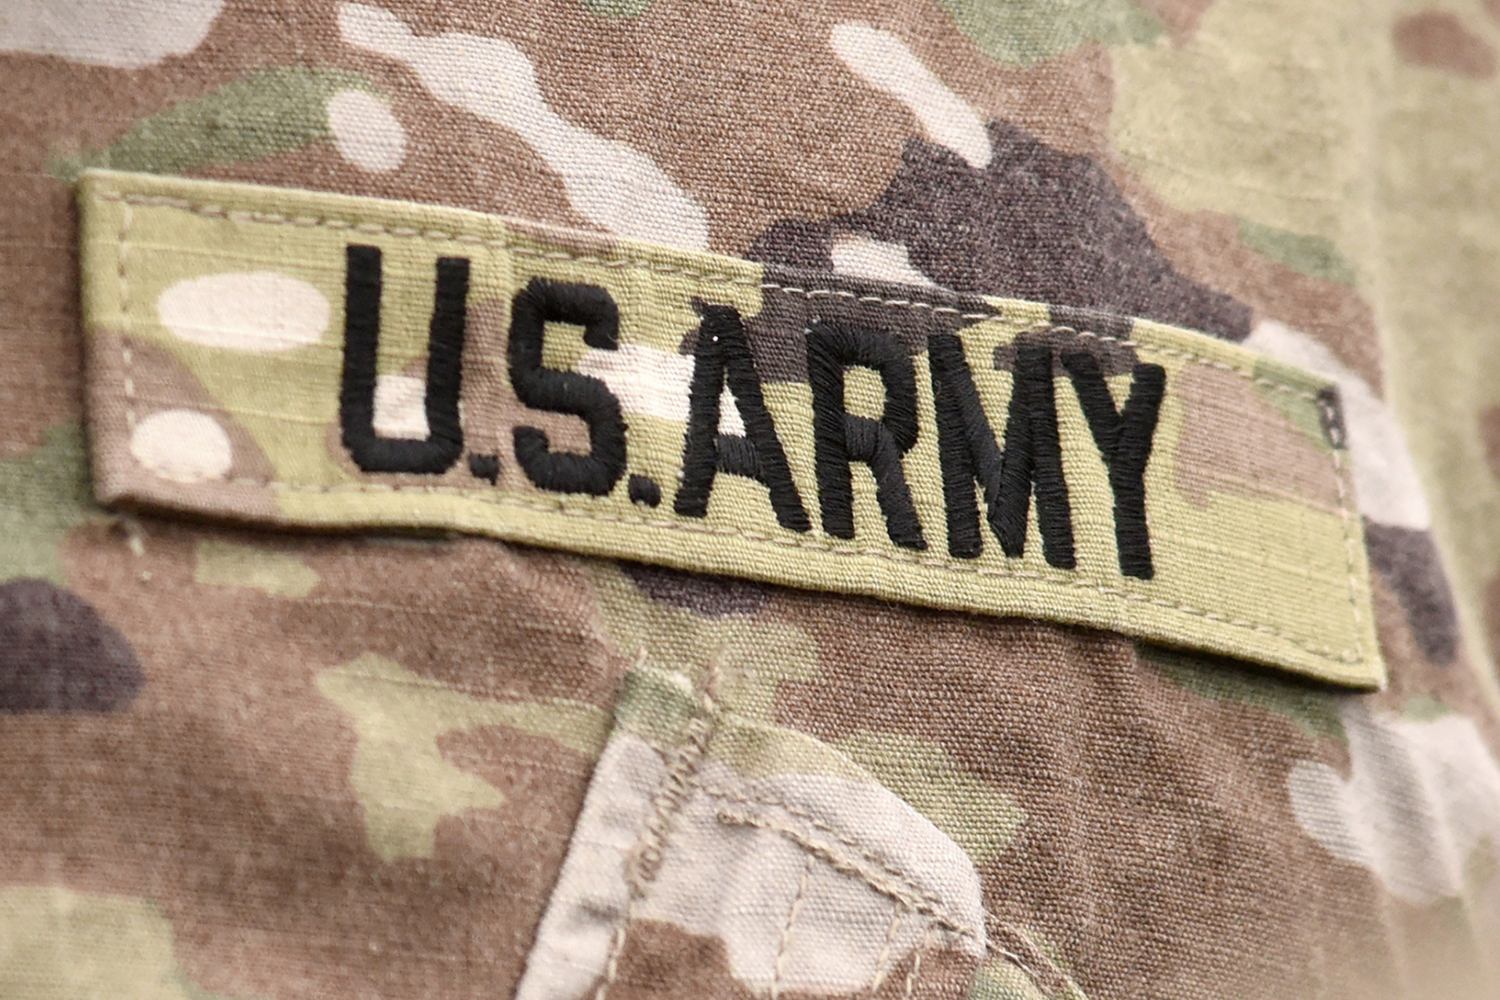 Closeup of an embroidered U.S. ARMY patch on camouflage-patterned material